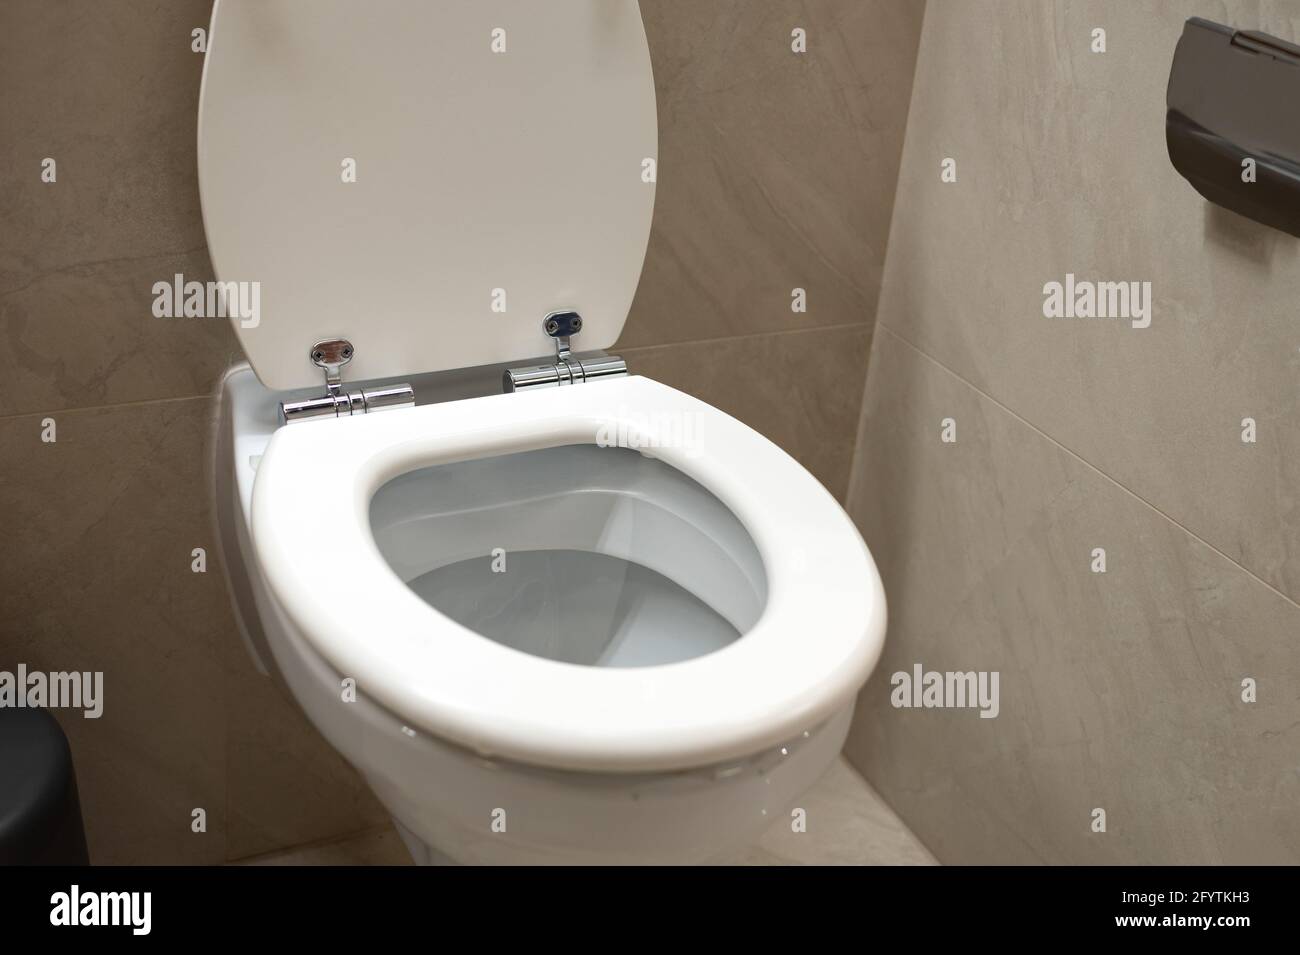 White new ceramic toilet bowl in the bathroom in close-up Stock Photo